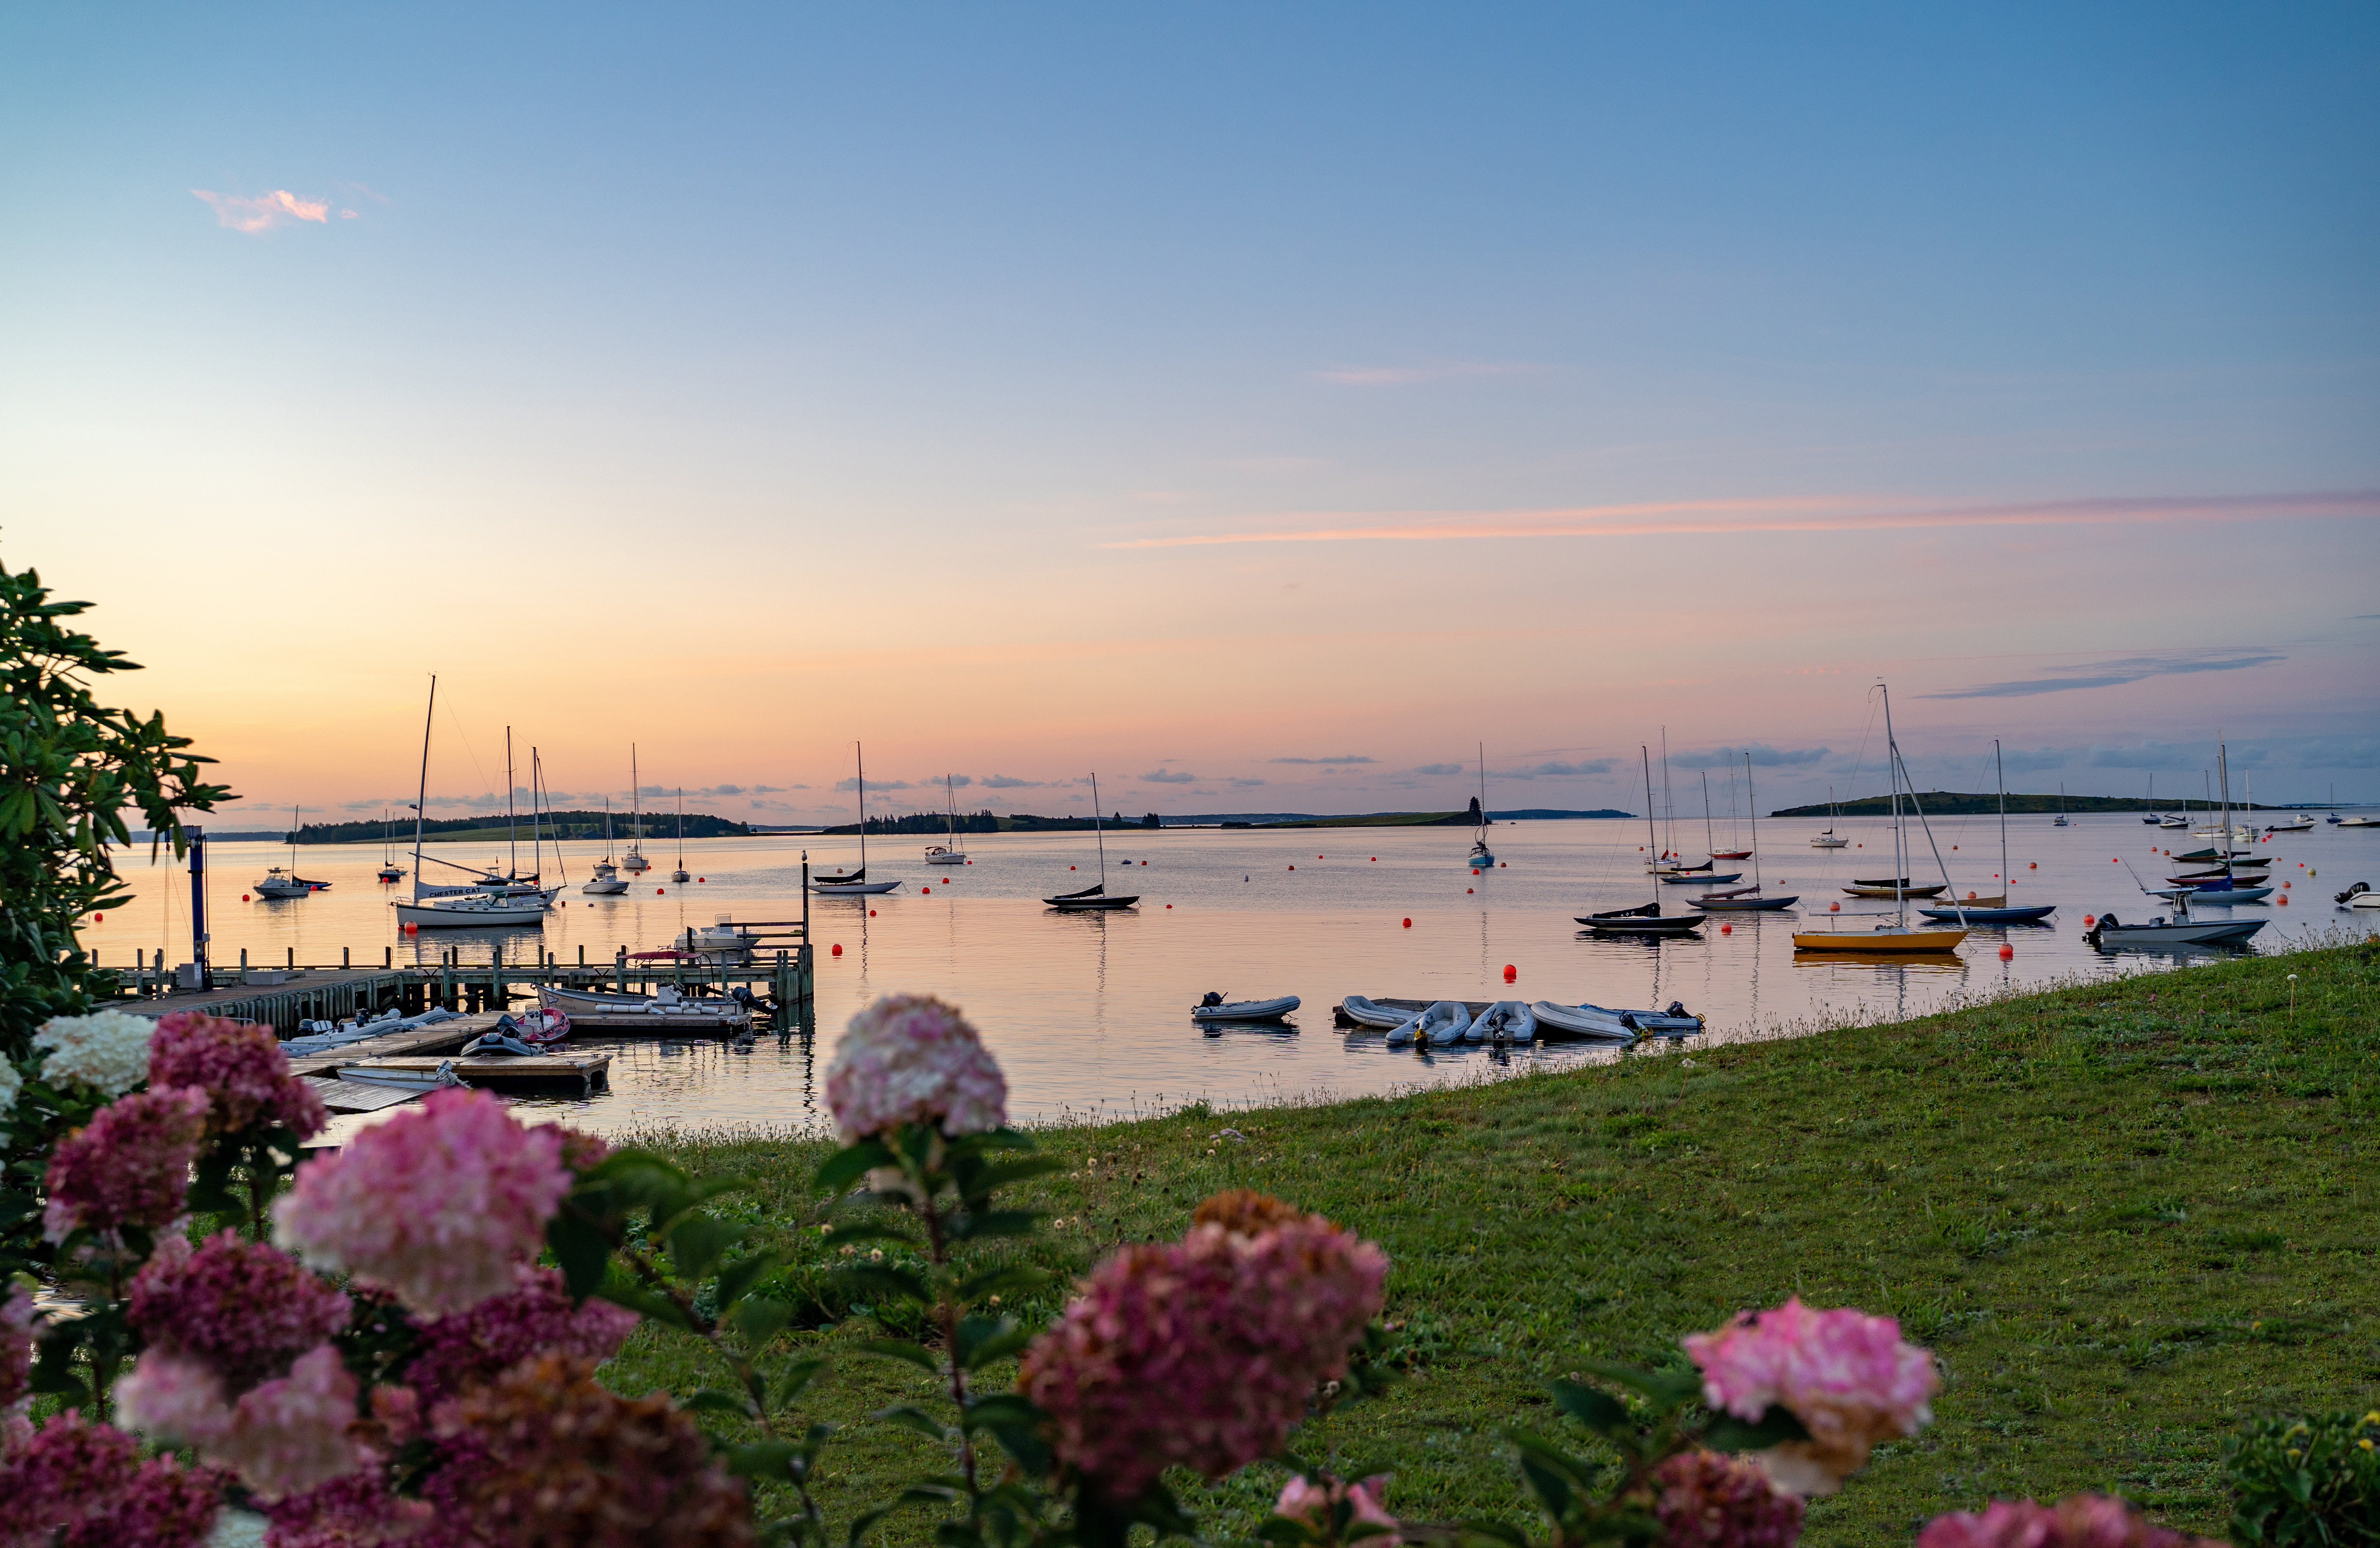 Harbour with many boats at sunset with grass and pink flowers in the foreground.